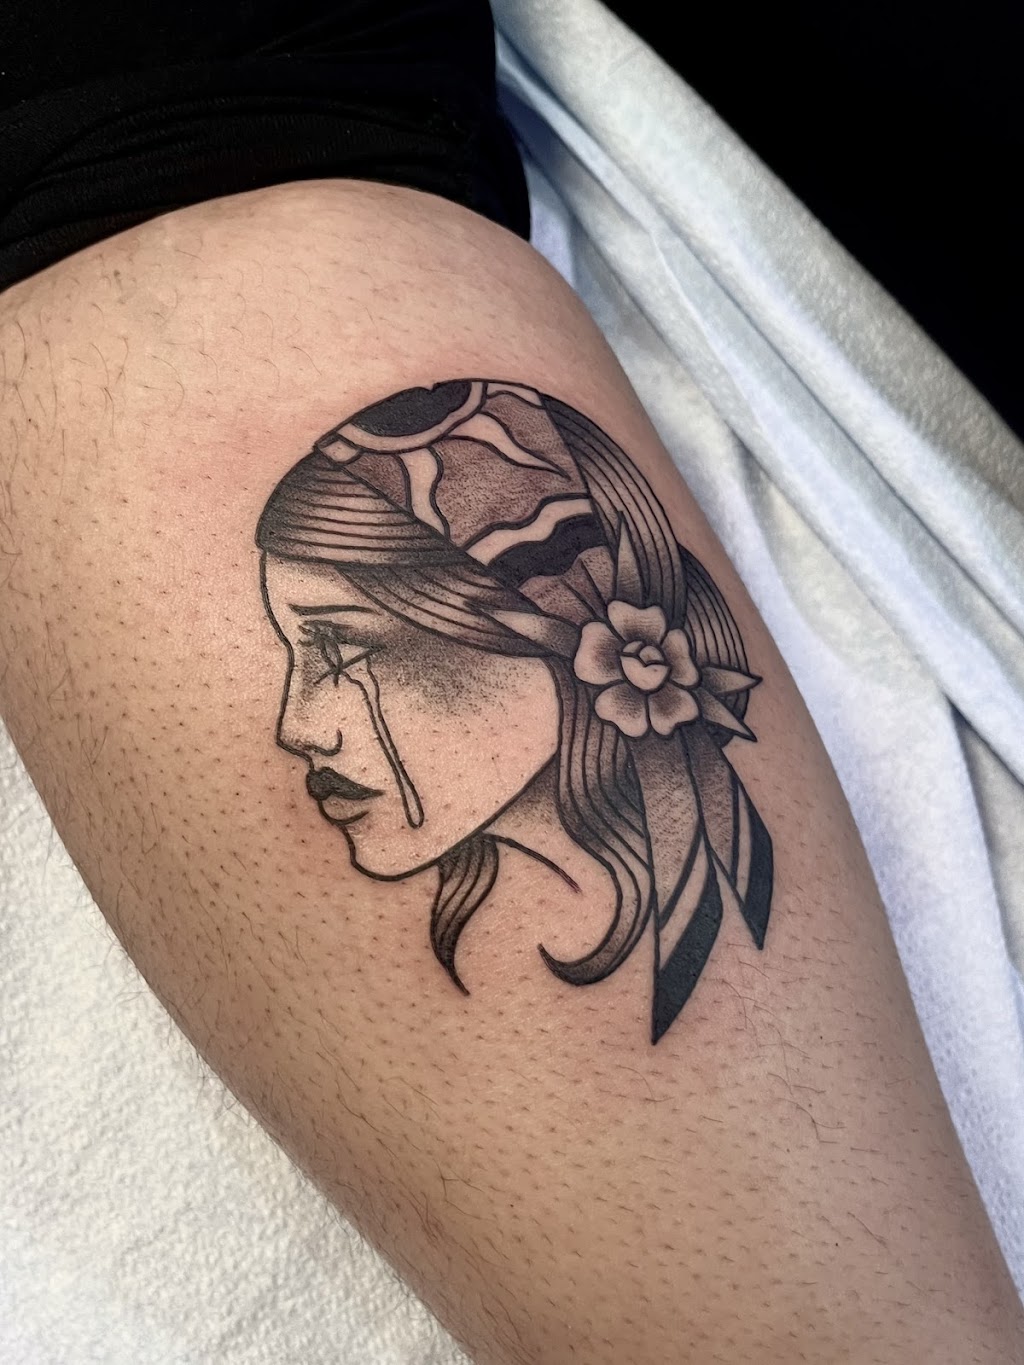 Tattoos by Brittany Ink | 22 N Main St, Ellenville, NY 12428 | Phone: (929) 420-4670